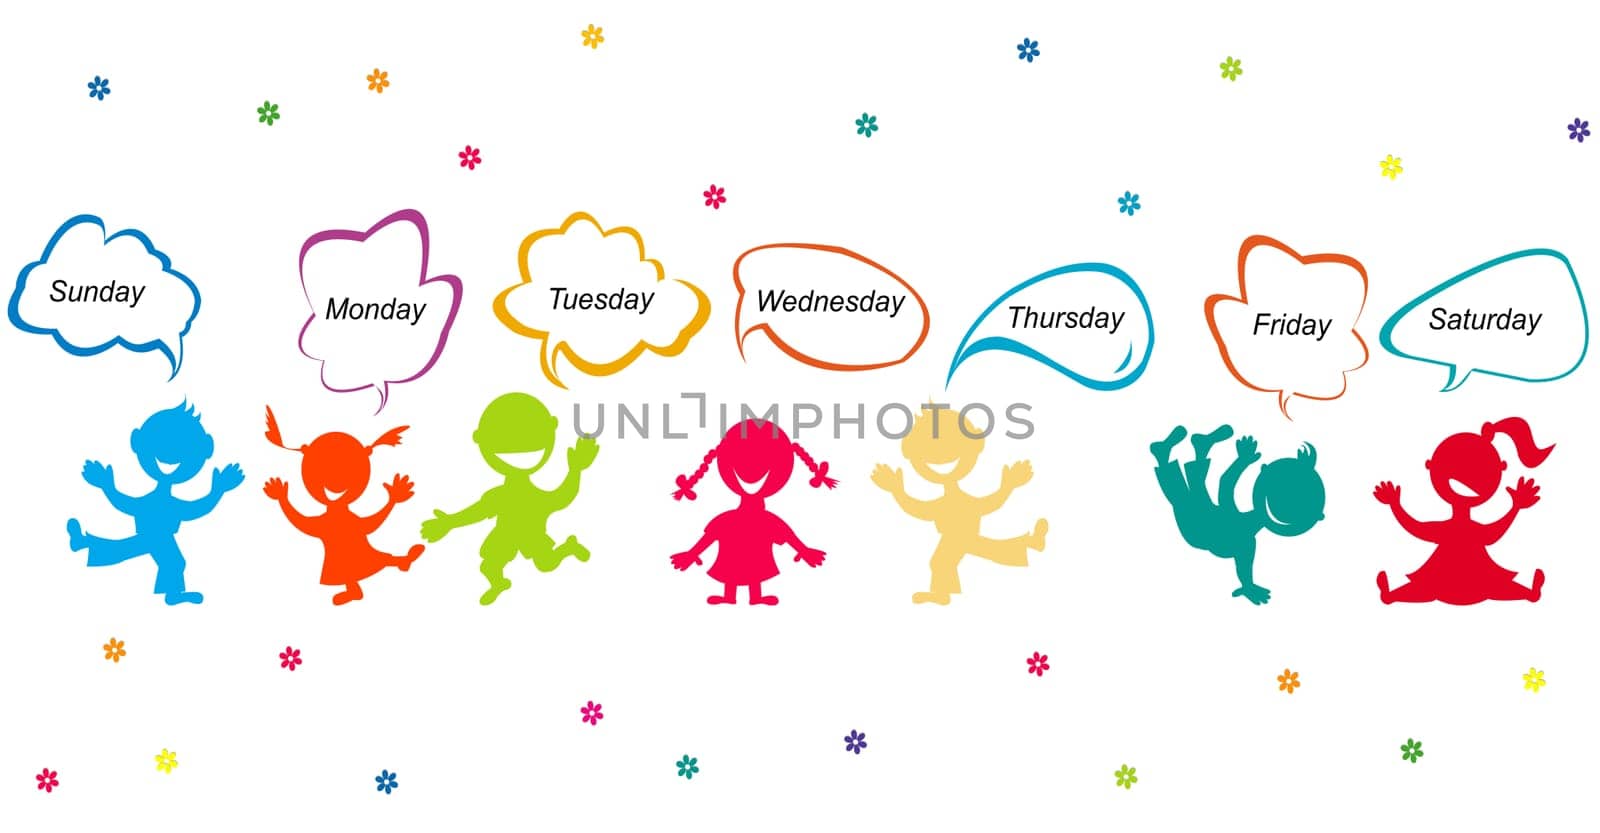 Colorful cartoon kids with days of the week written in chat bubbles by hibrida13